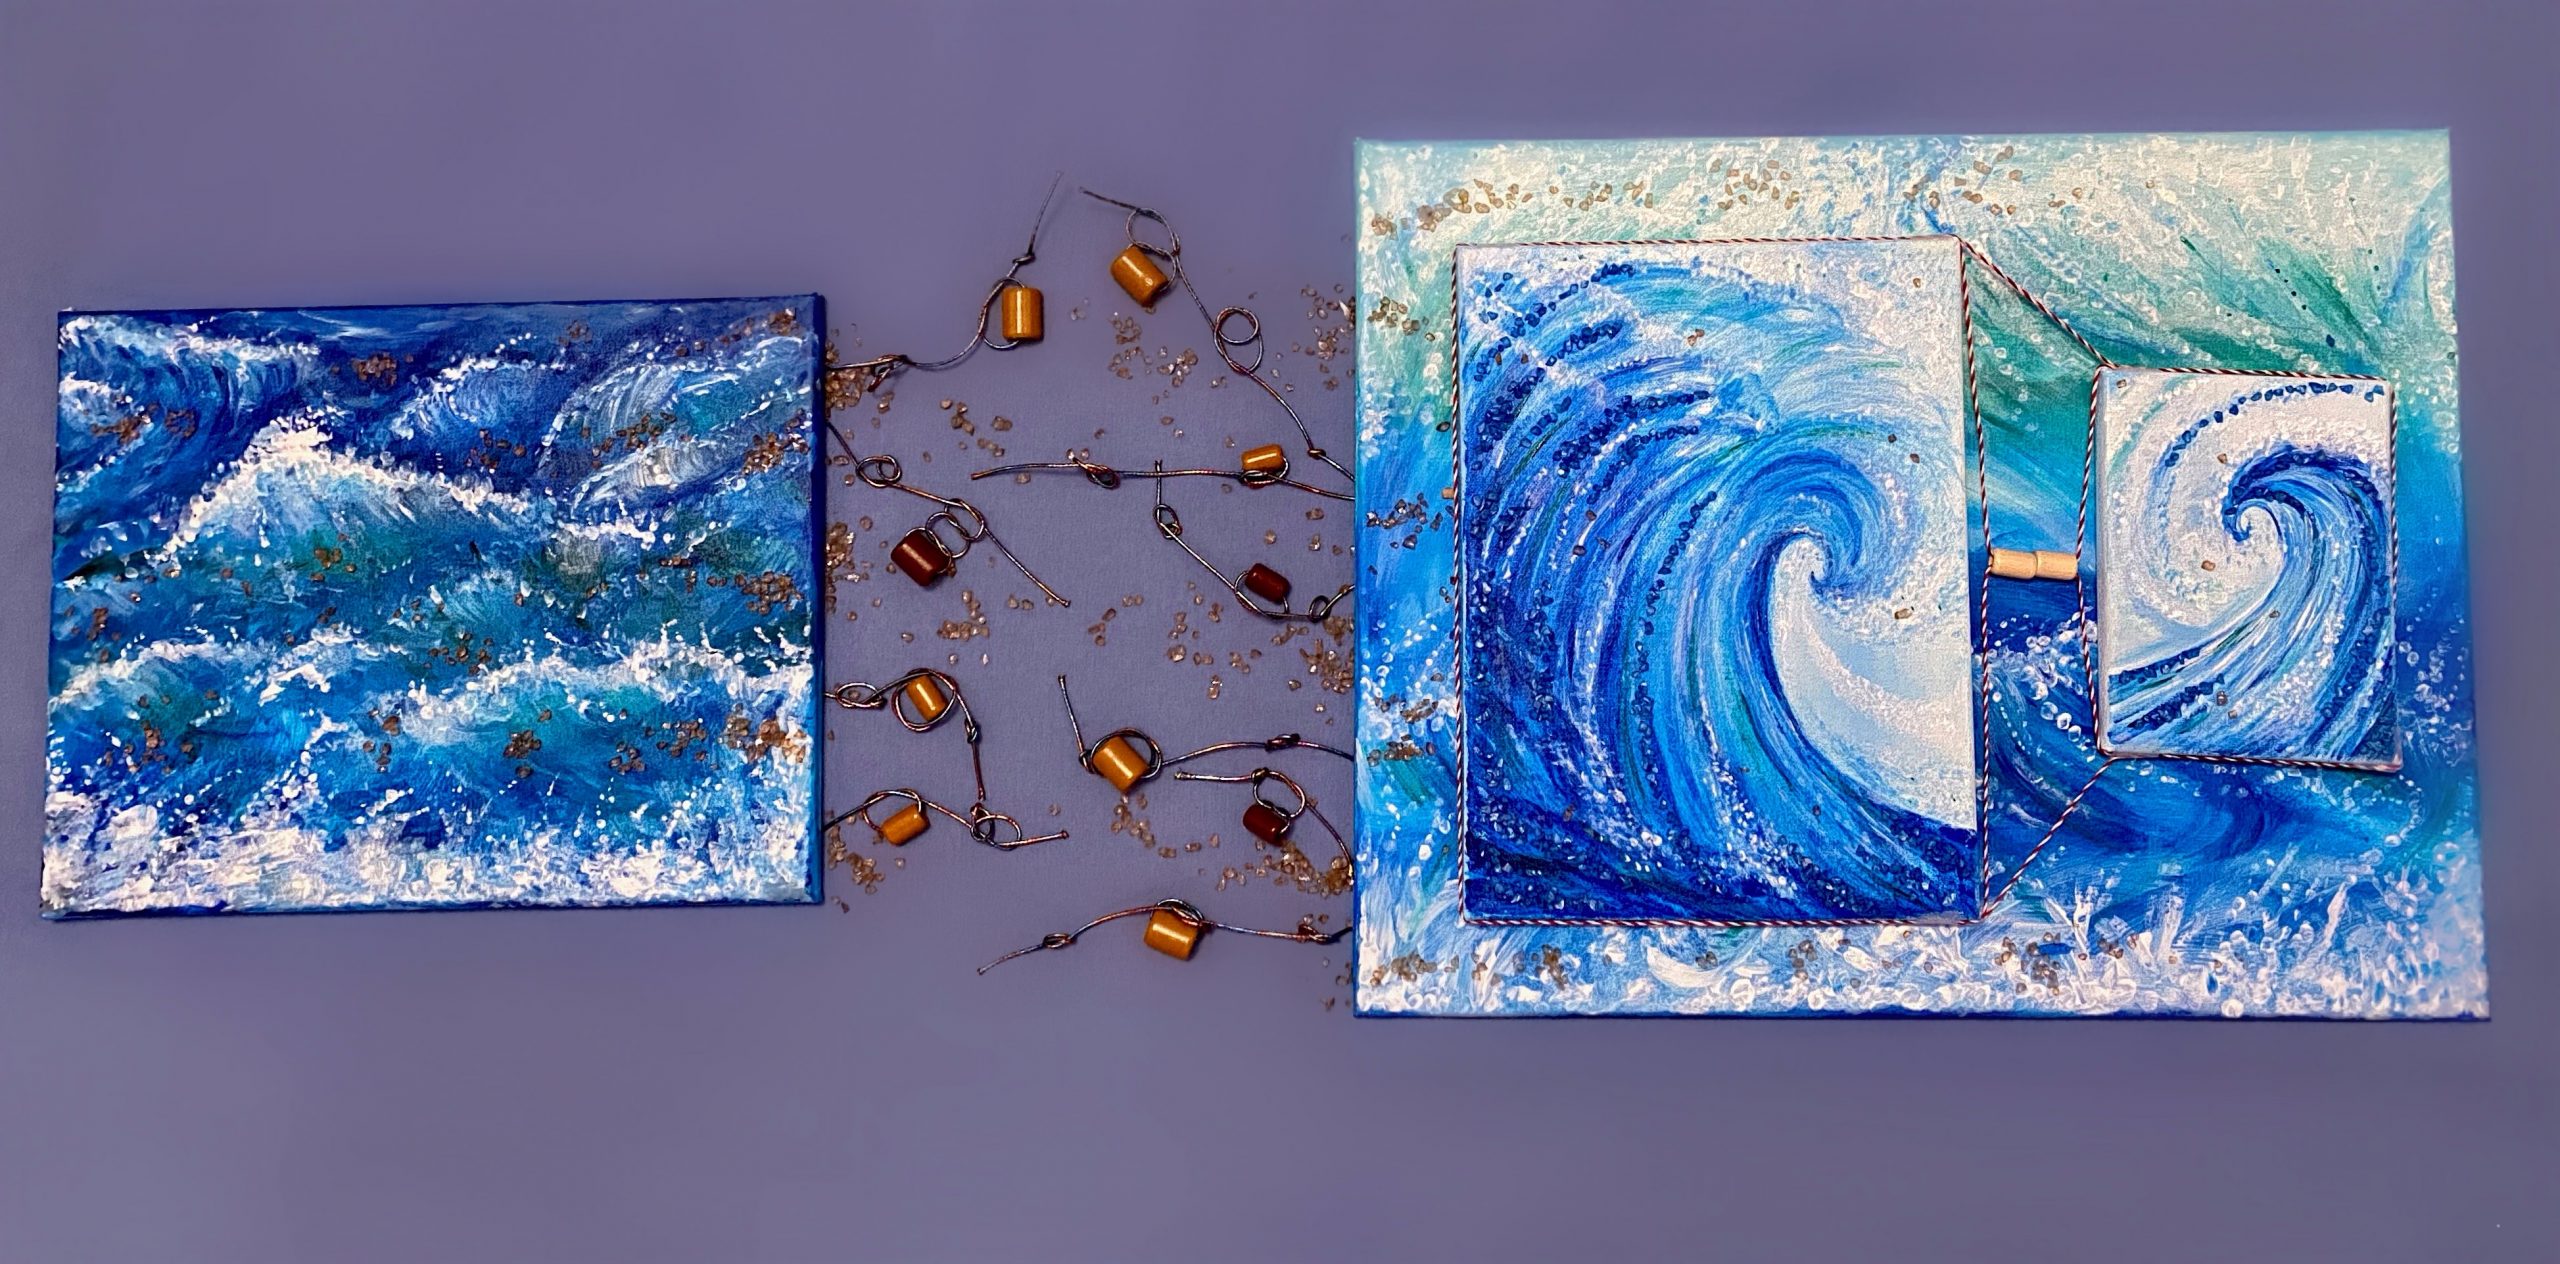 Two blue and white paintings represent the dynamic waves of the ocean. In between, are long elastics, wooden beads, and scattered gravel that almost connect them.